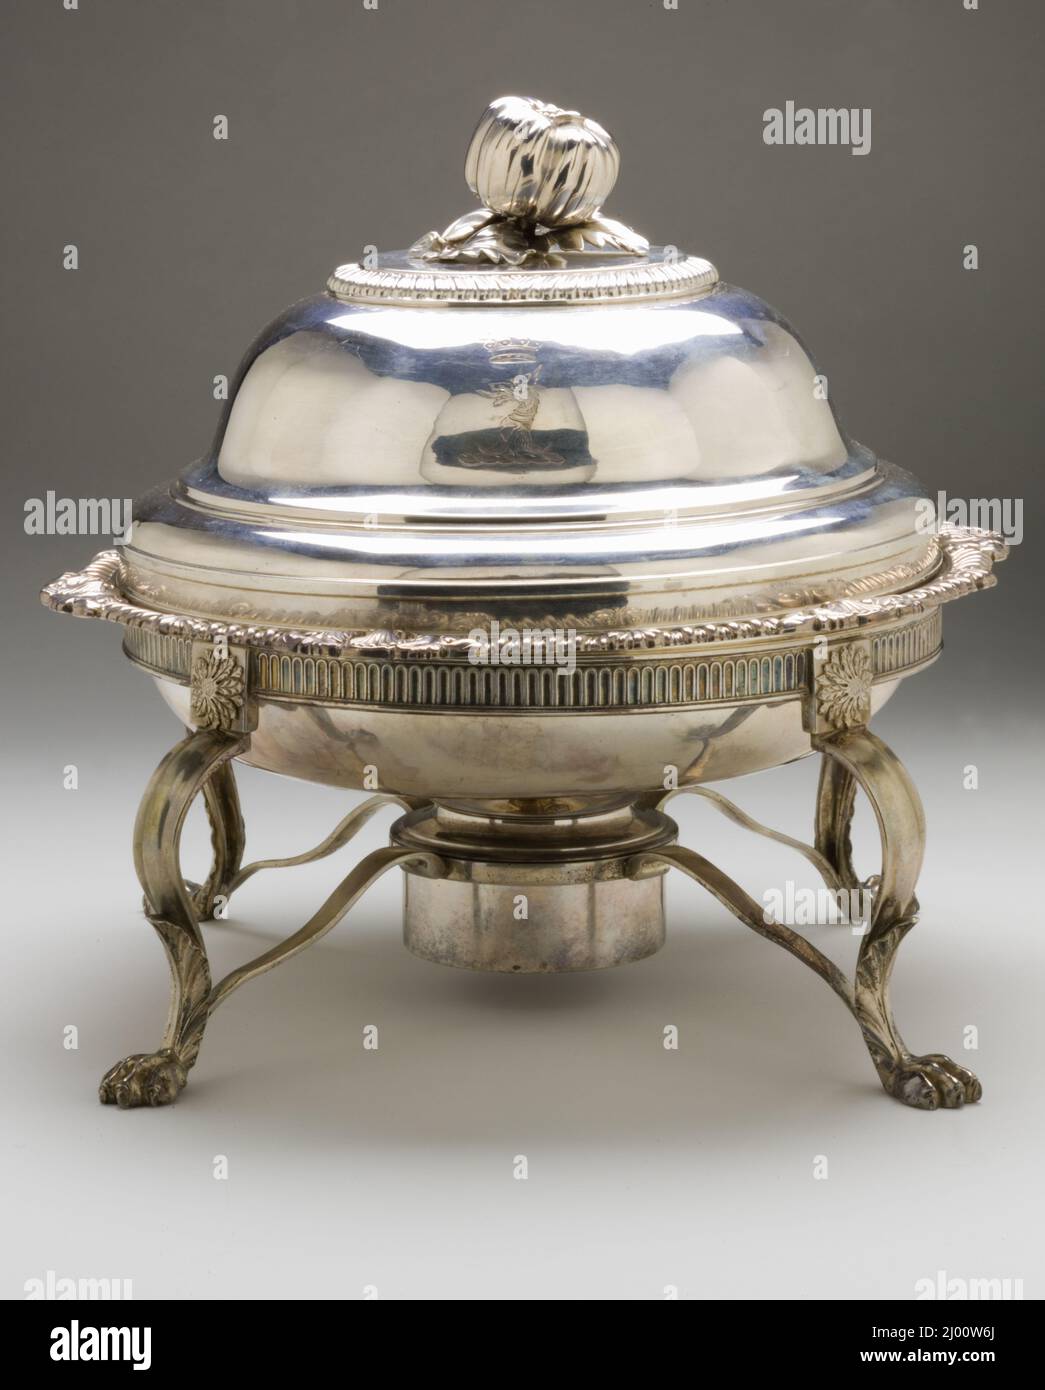 Entrée Dish with Cover and Warming Stand with Burner. Paul Storr (England, London, 1771-1844)William Bateman II (England, circa 1800-circa 1875). England, a-b) 1813; c-e) 1833. Furnishings; Serviceware. Silver Stock Photo